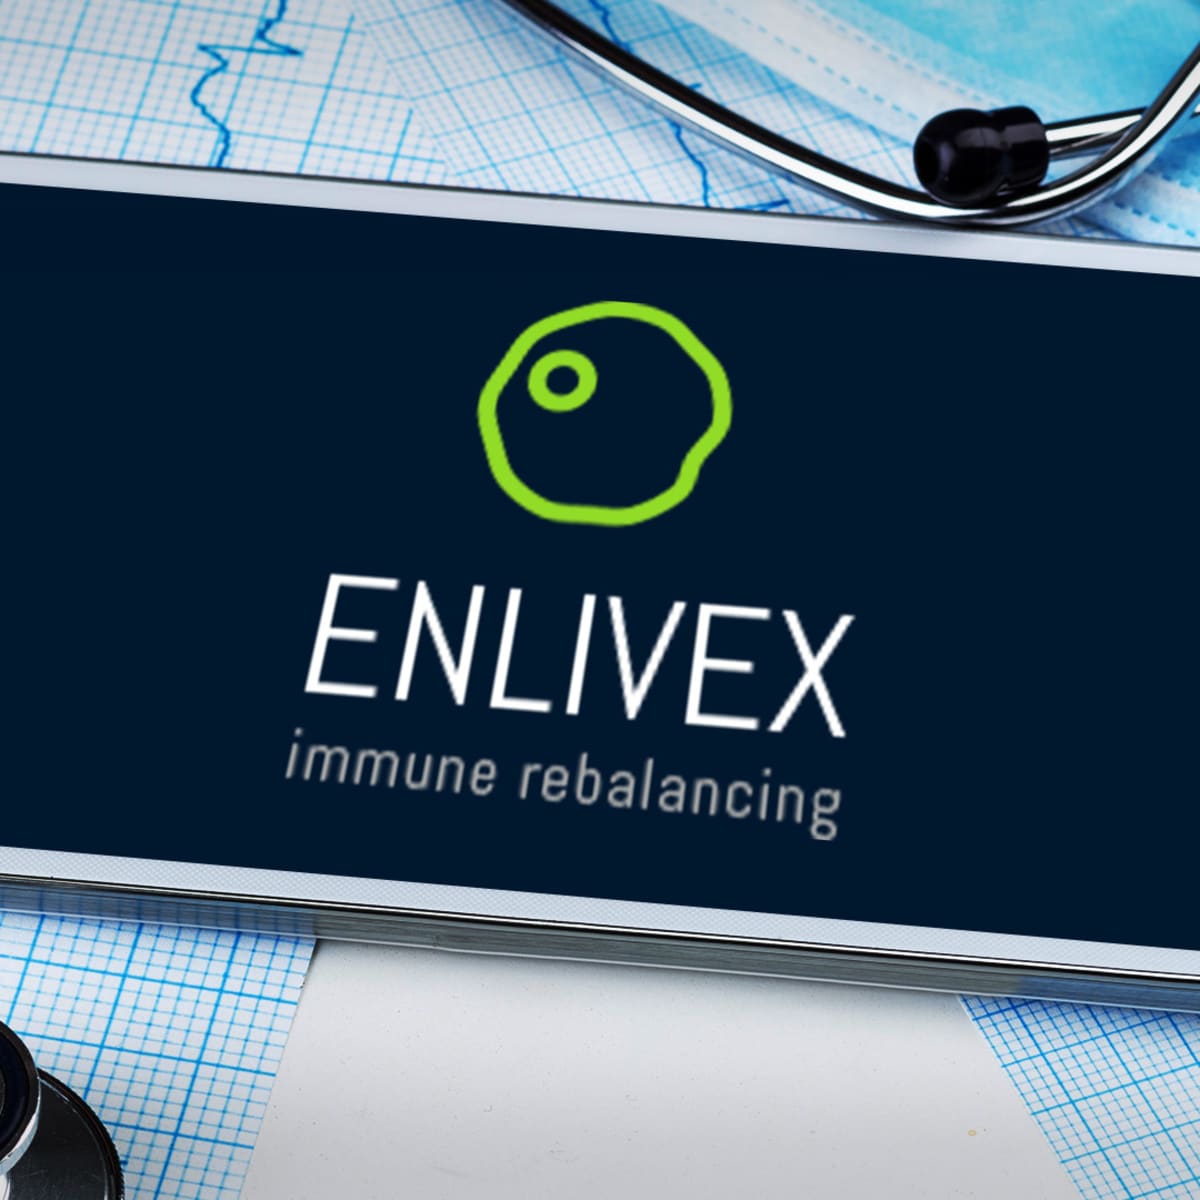 CEO Spotlight: Enlivex Therapeutics CEO Tells Why And How Recent Milestones Can Transform This MedTech Company ($ENLV)